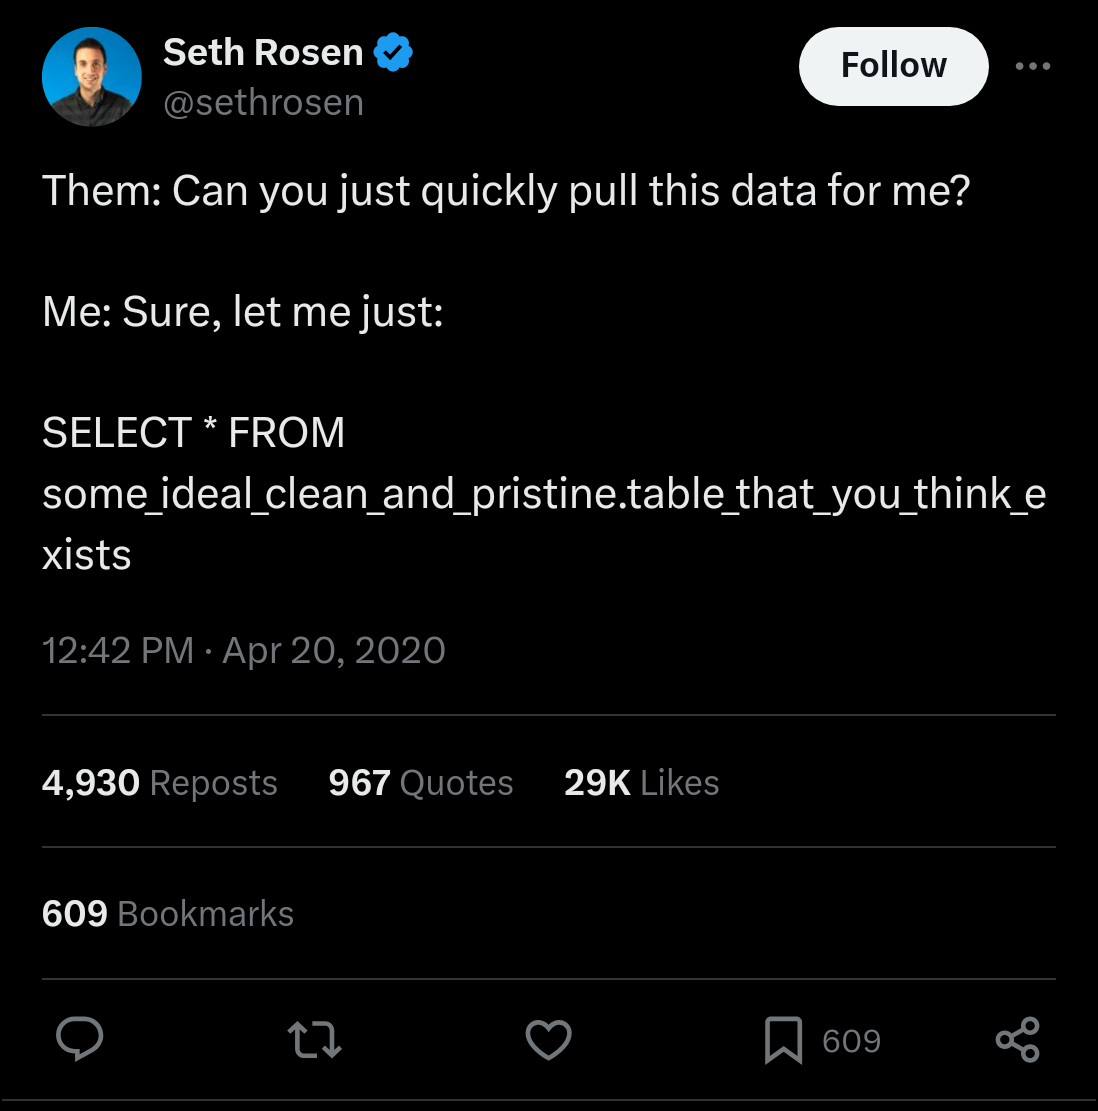 Post by Seth Rosen on X/Twitter: Them: Can you just quickly pull this data for me? Me: Sure, let me just: SELECT * FROM some_ideal_clean_and_pristine.table_that_you_think_exists